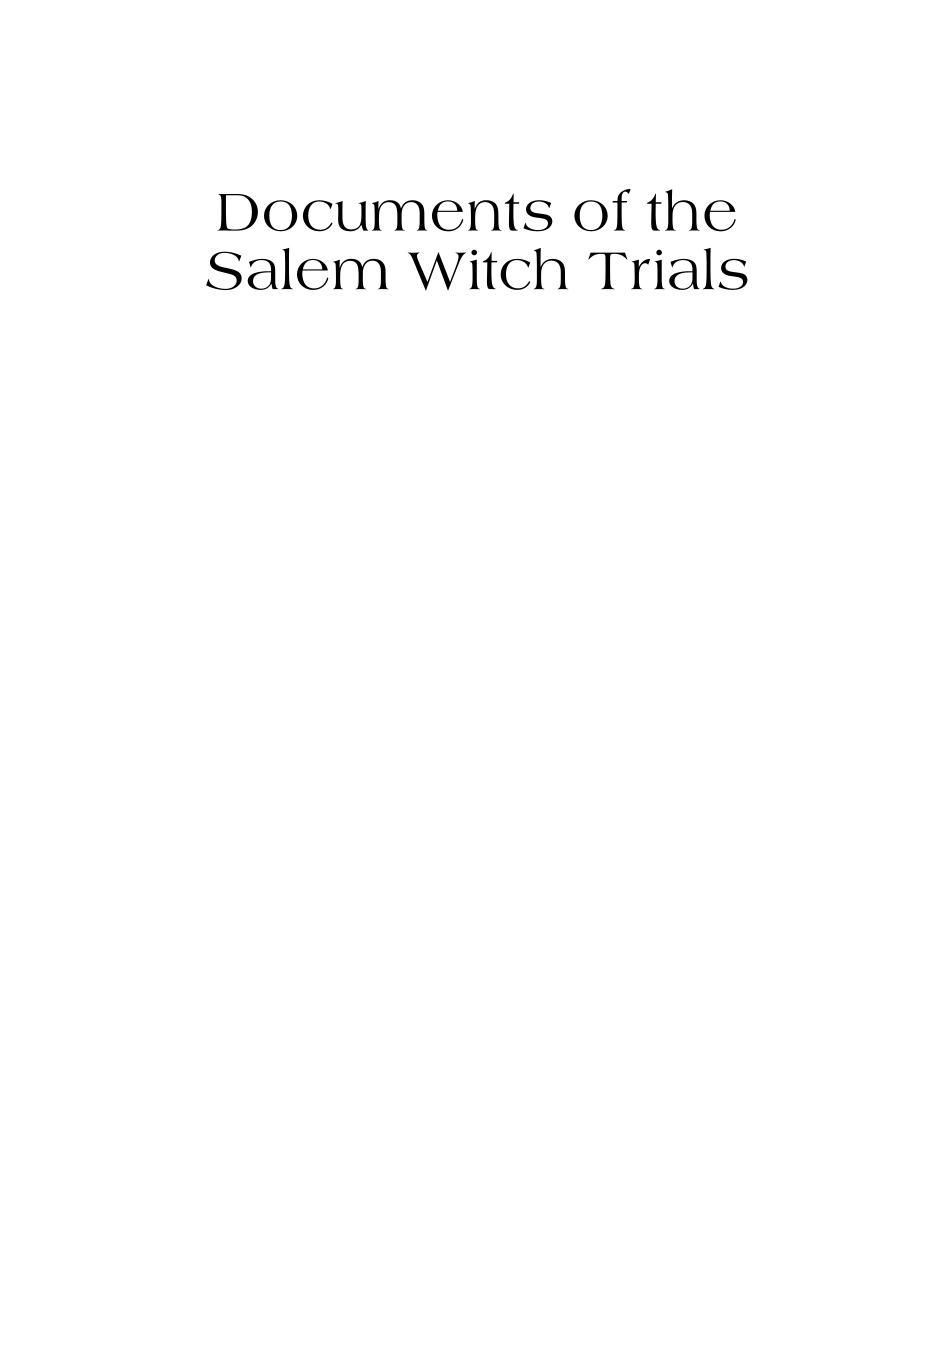 Documents of the Salem Witch Trials page i1